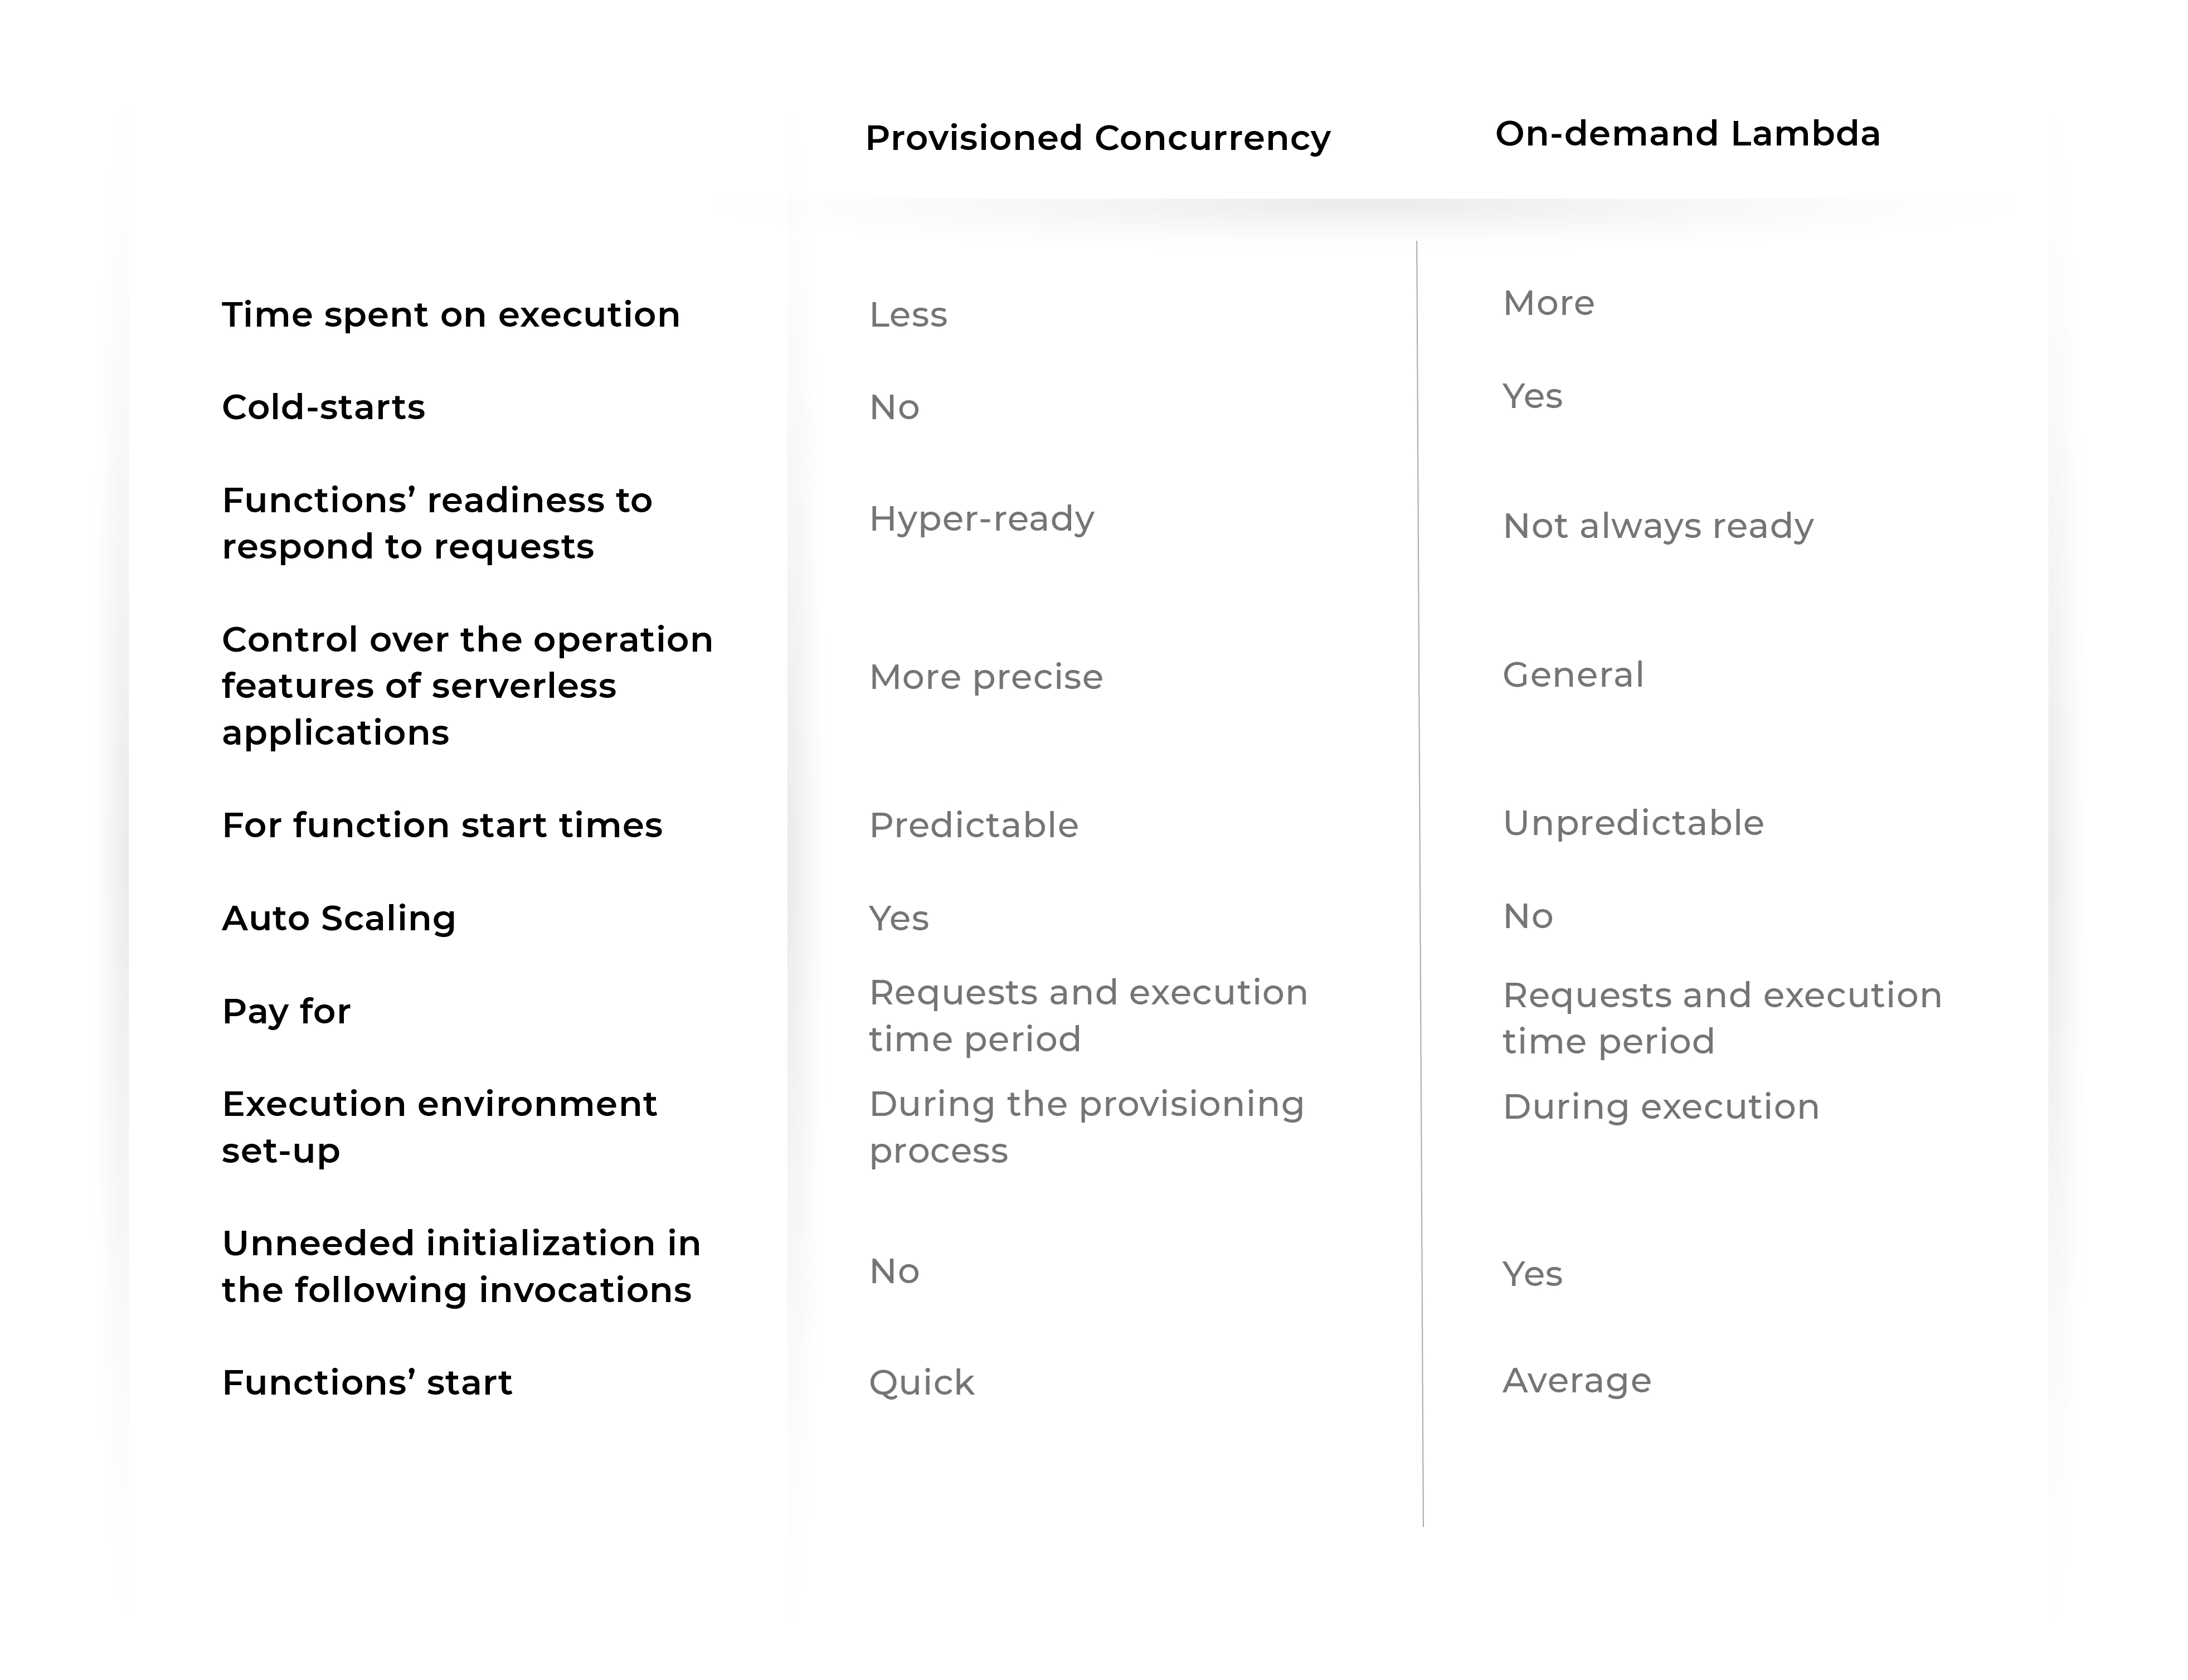 Provisioned Concurrency vs On-demand Lambda